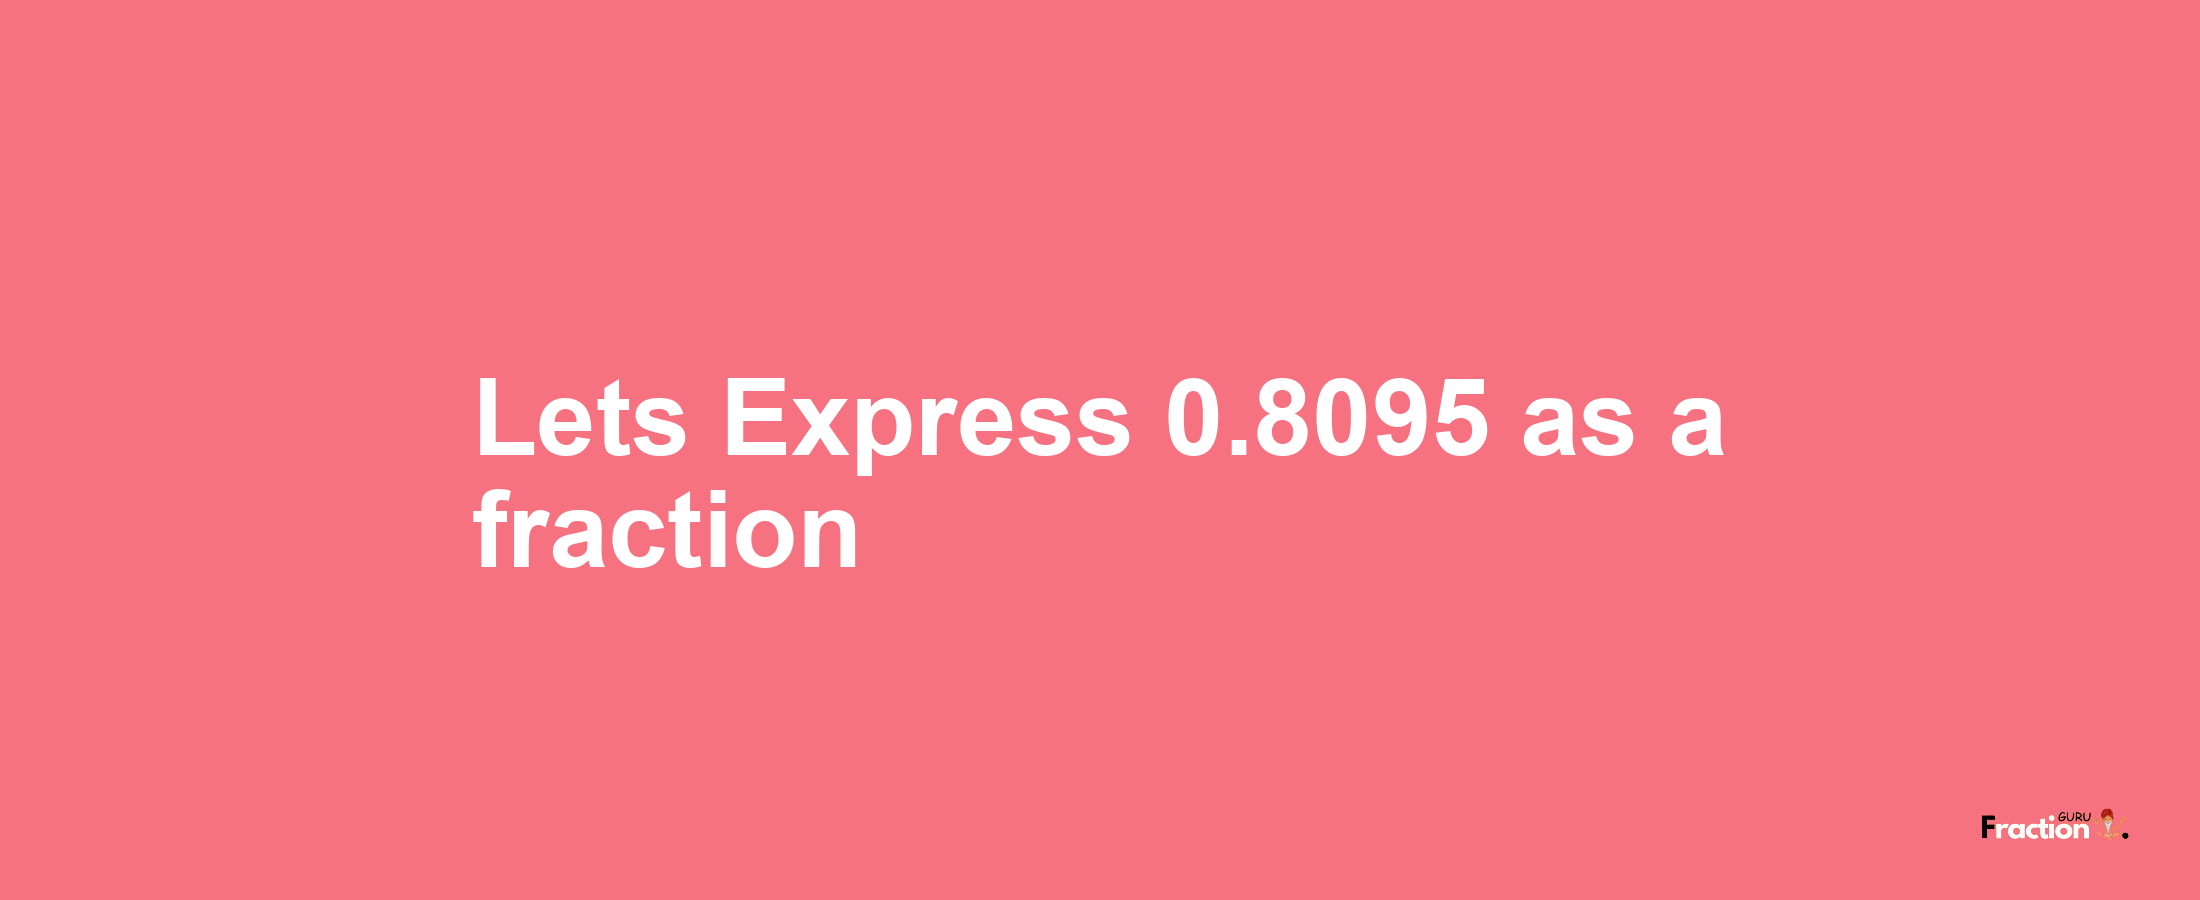 Lets Express 0.8095 as afraction